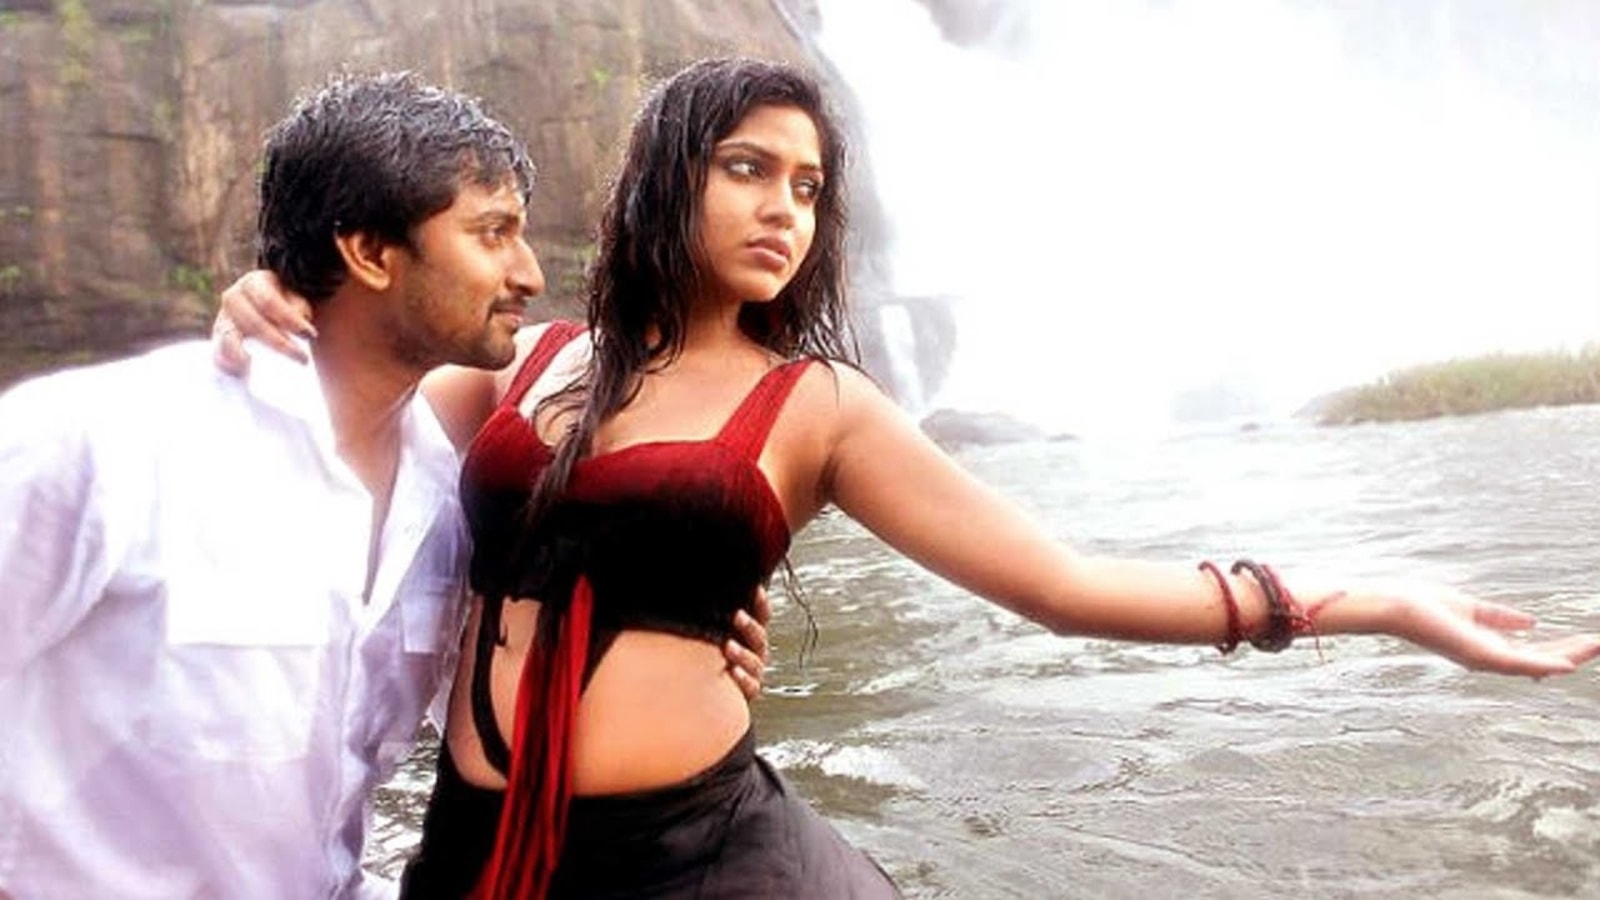 Amala Paul says Telugu films have actresses for just love scenes, songs pic picture